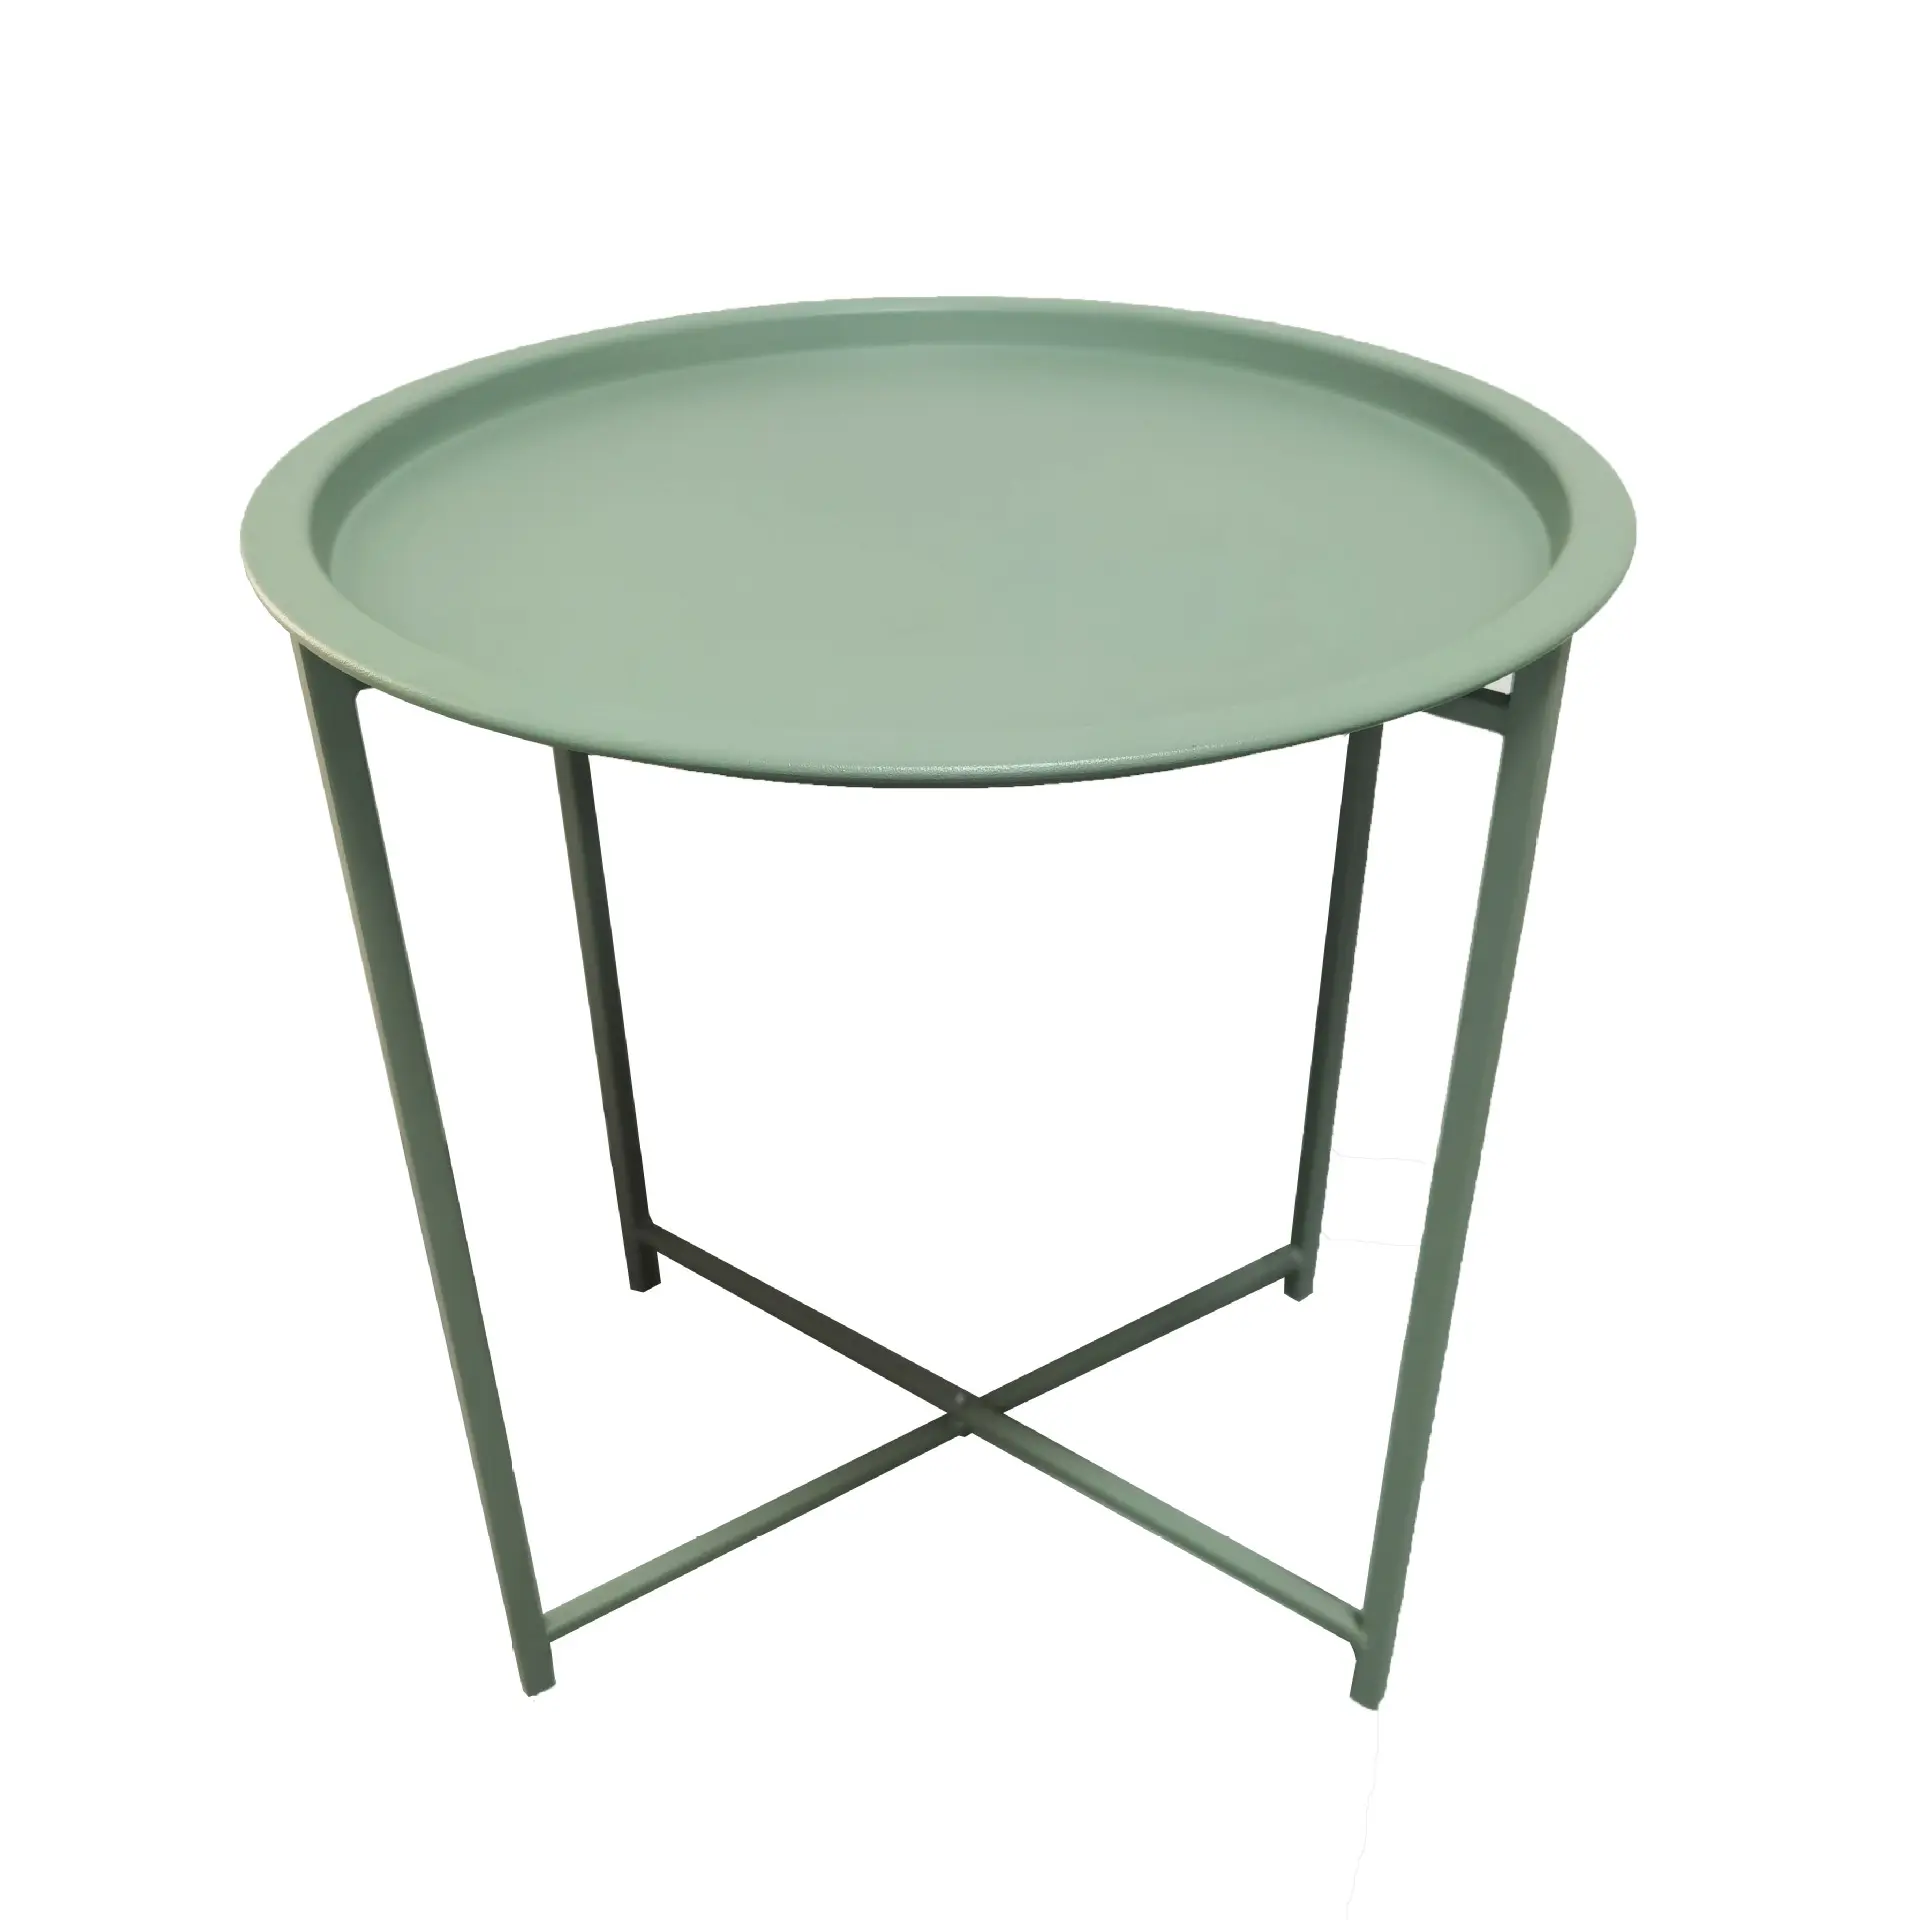 Hot-selling Simple Design Outdoor Furniture Garden Balcony Durable Coffee Table Round Portable Metal Bistro Folding Table